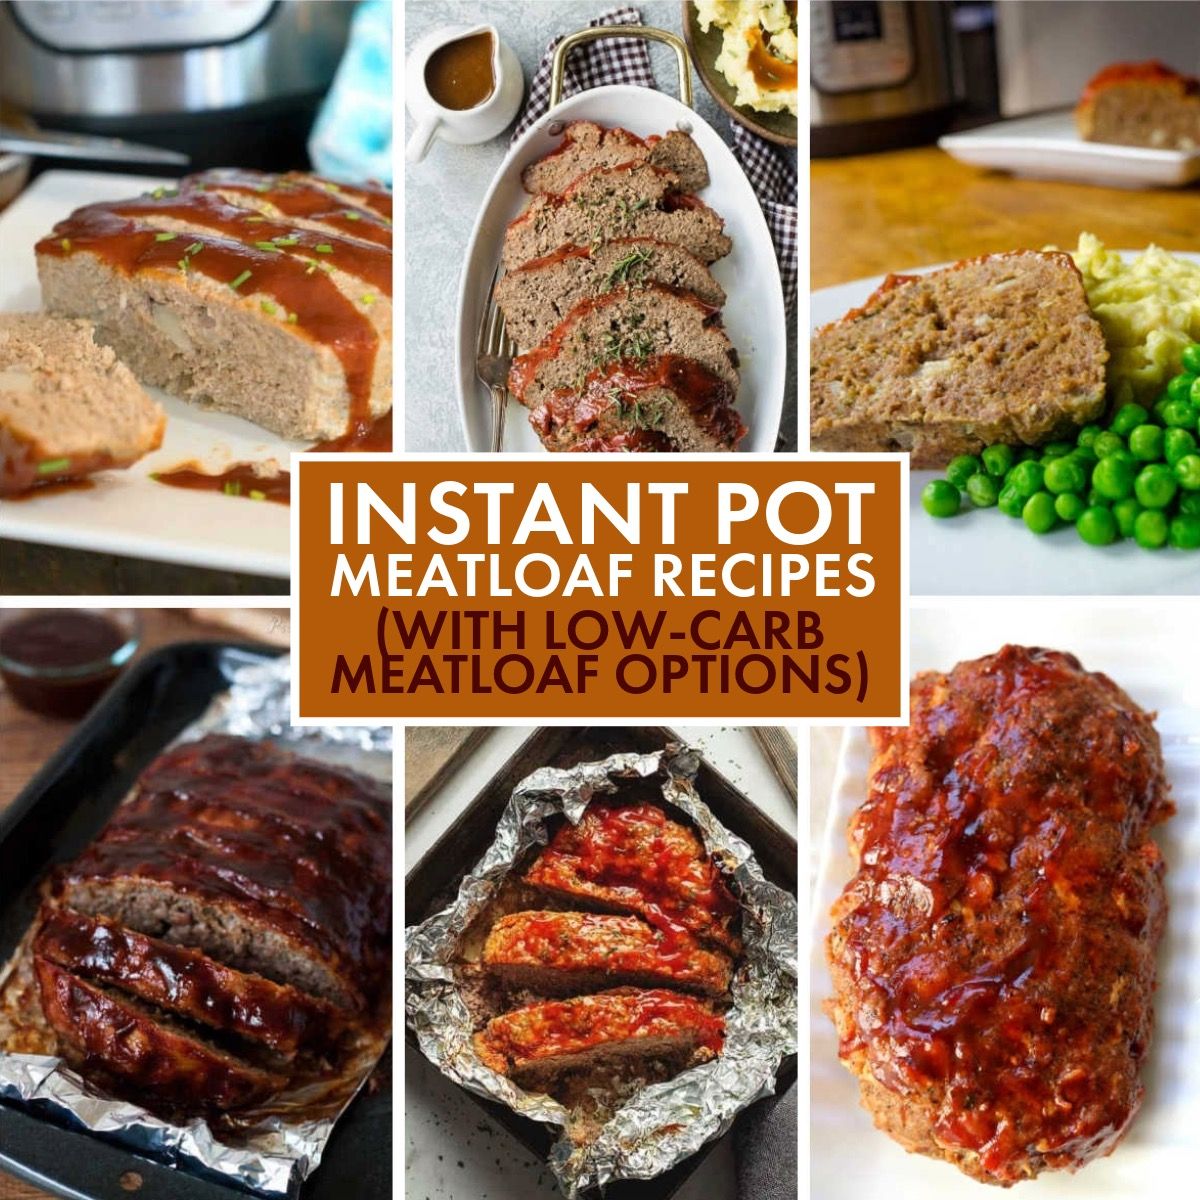 Instant Pot Meatloaf Recipes collage of featured recipes.